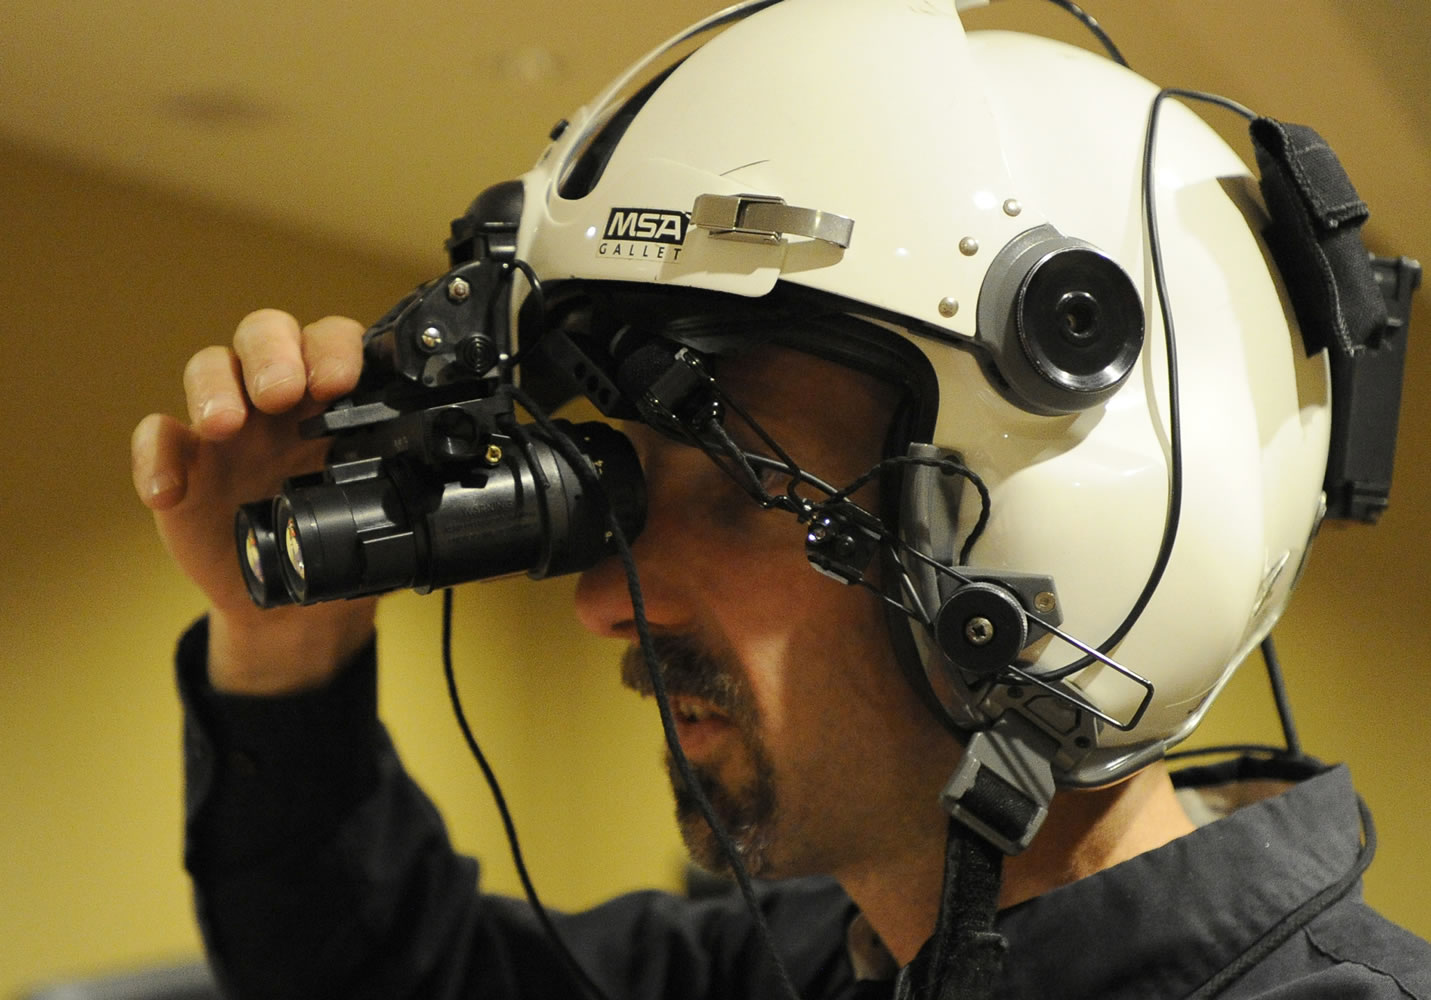 Jared Douglas, assistant chief flight instructor at Leading Edge Aviation, makes adjustments to his night-vision goggles prior to a flight June 11 at Bend Municipal Airport.